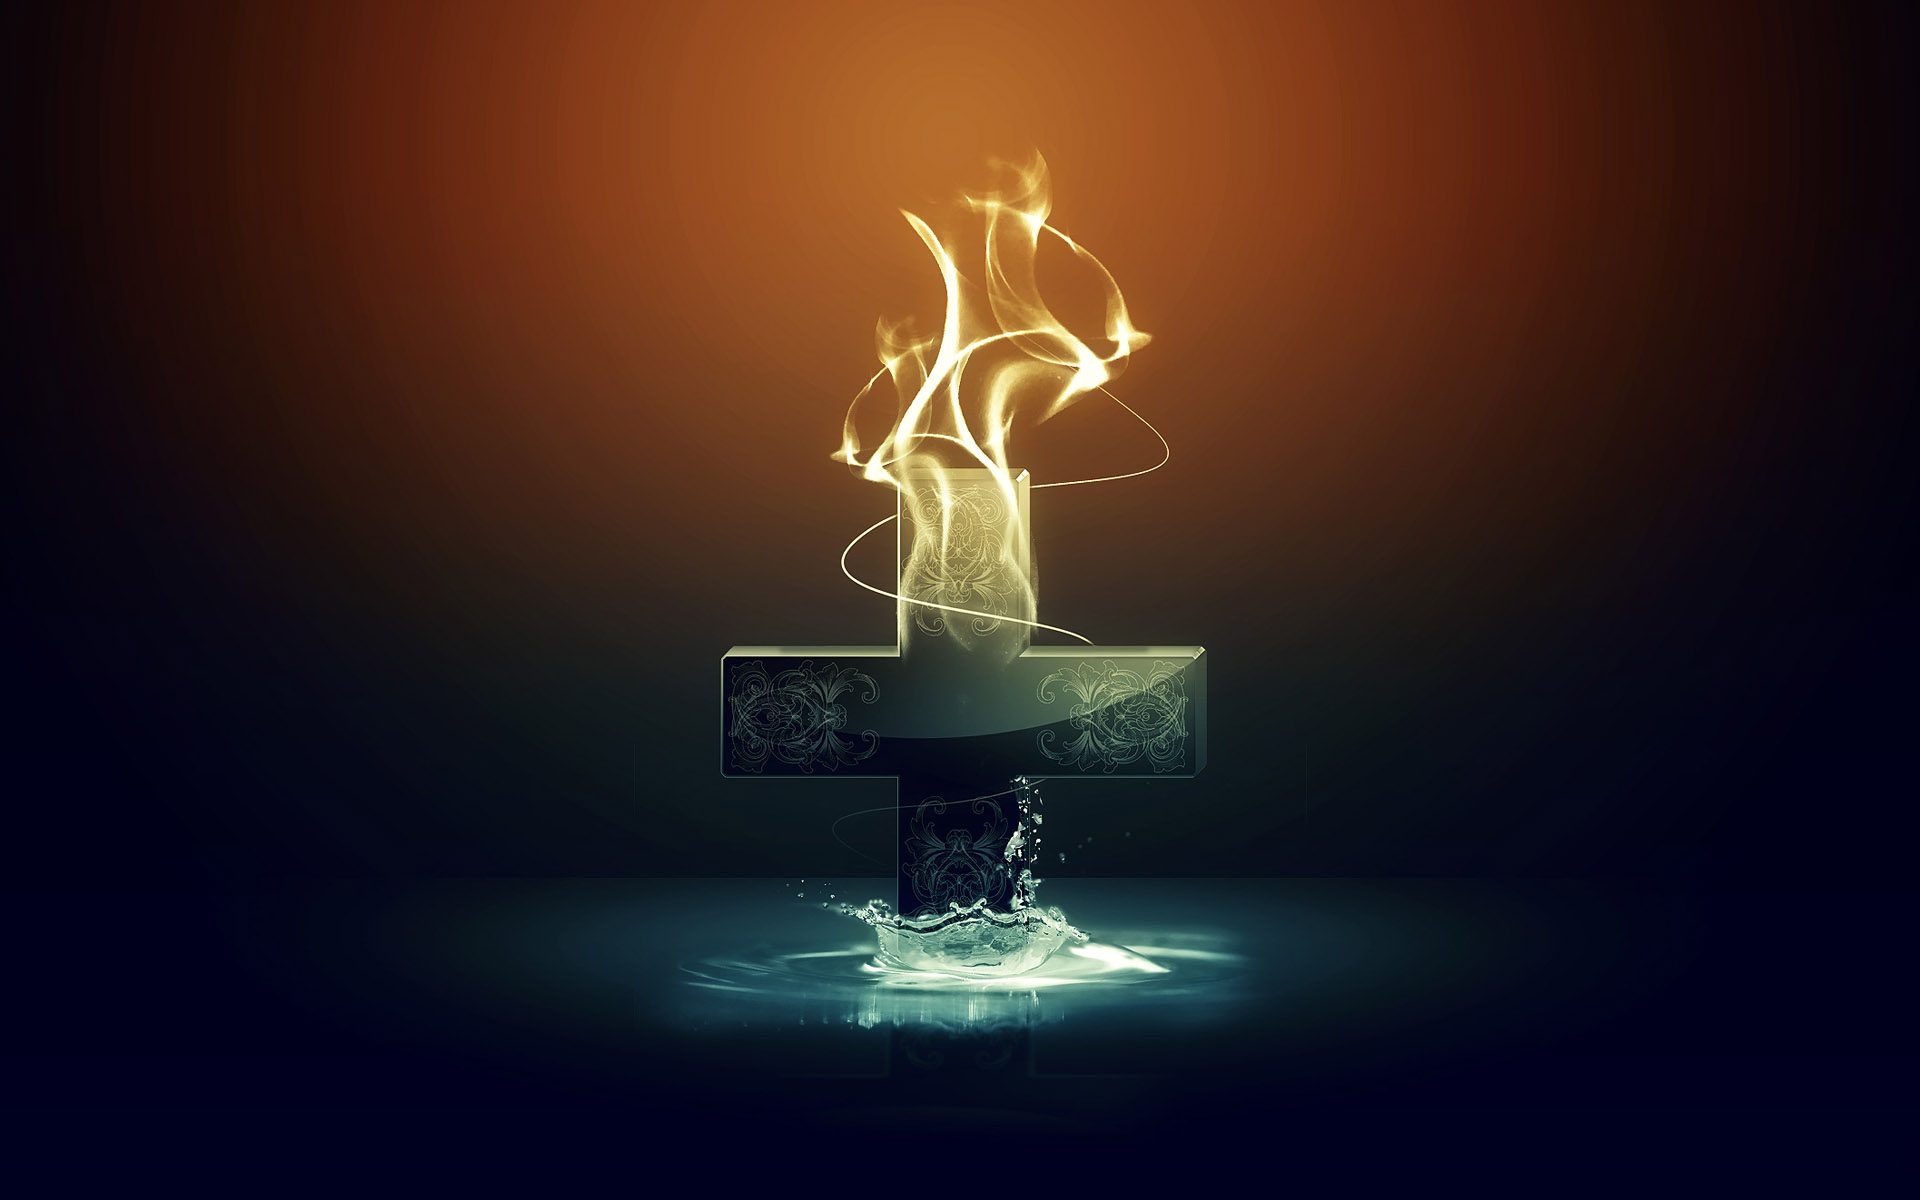 hd and 3d wallpaper,light,water,flame,still life photography,photography